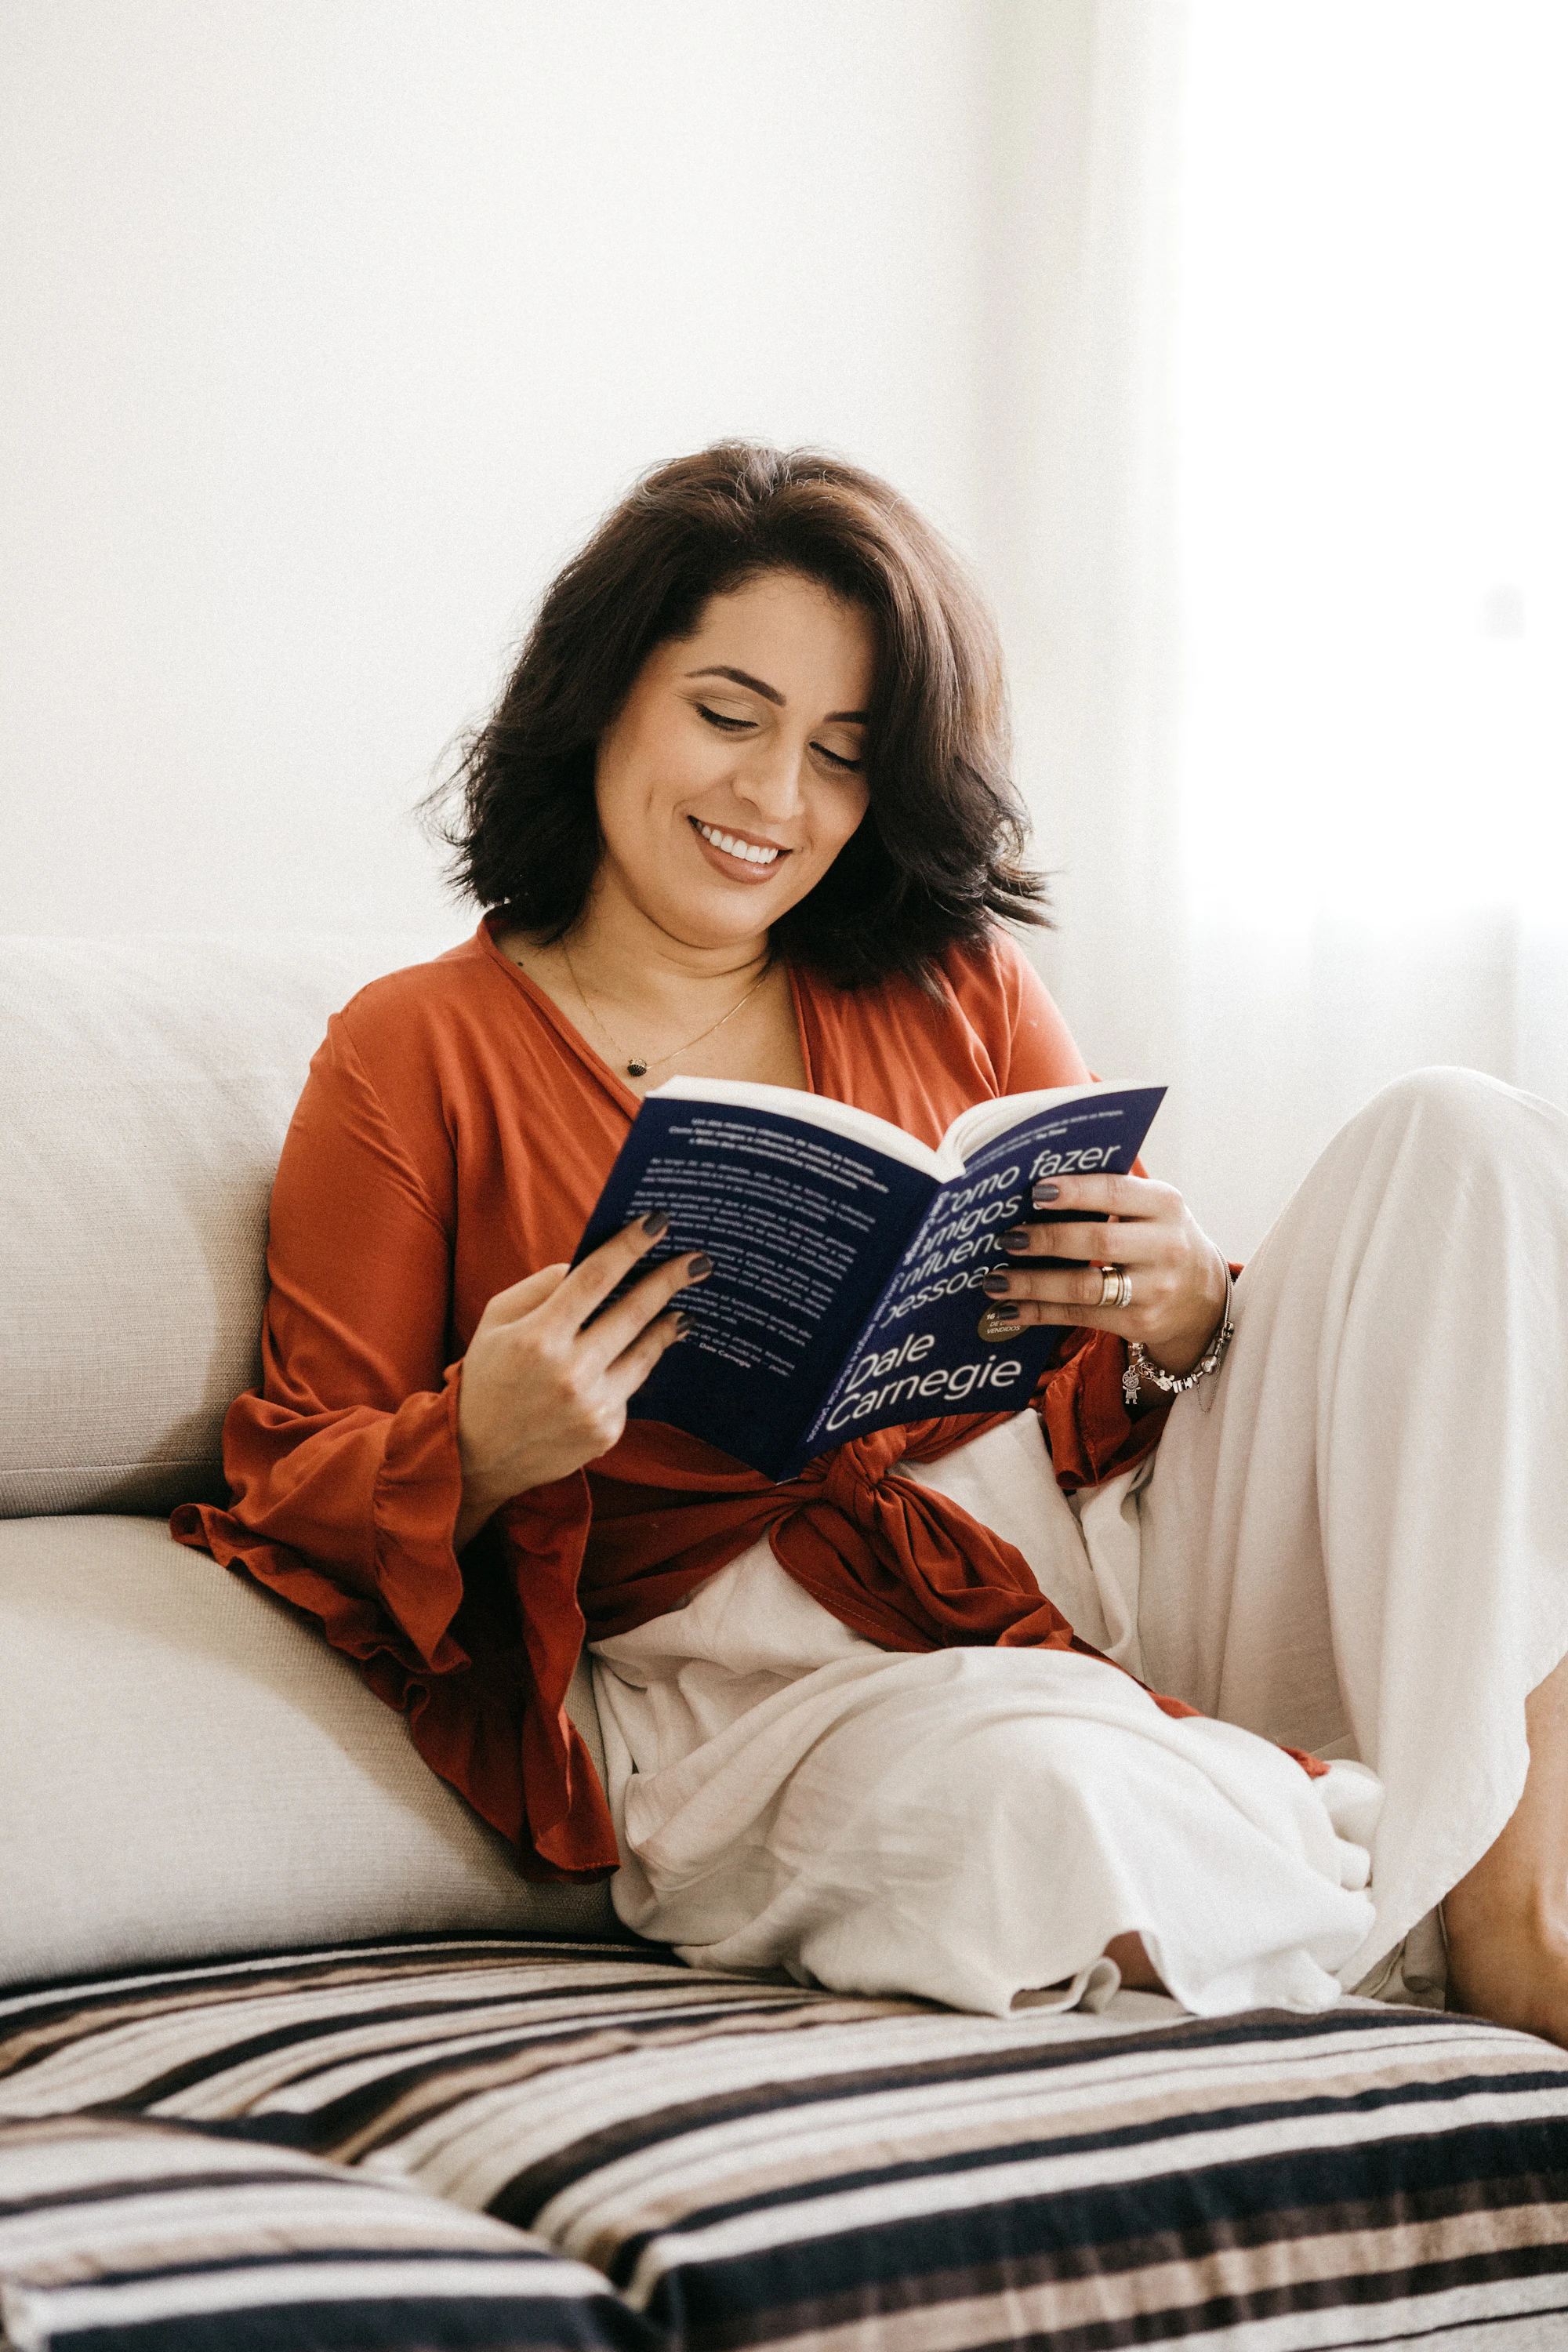 Reading physical book regularly reduces stress